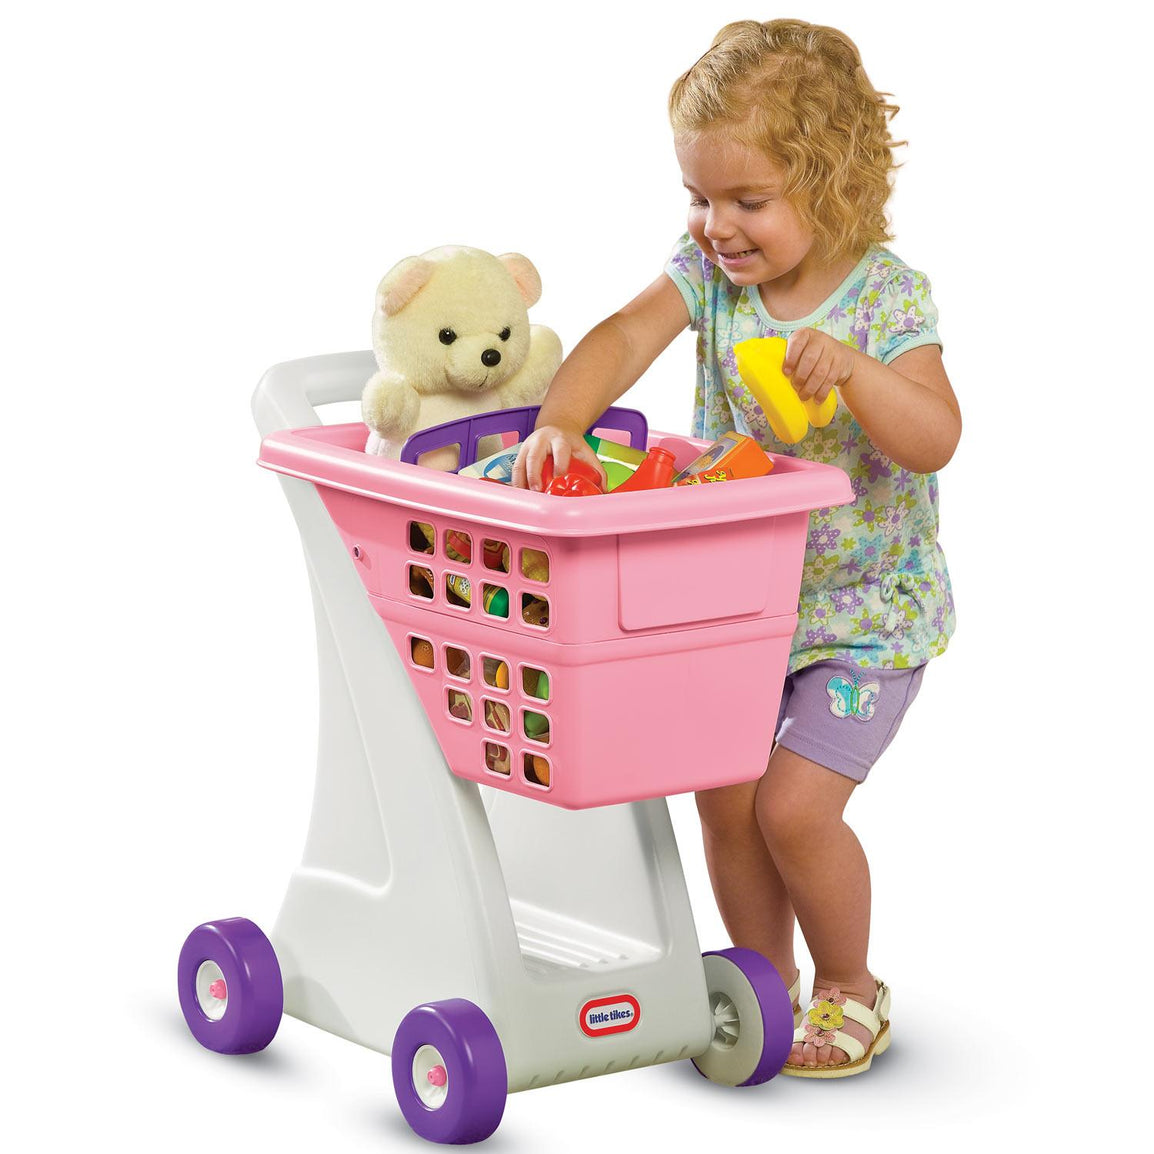 Kids can take their favorite toy along for the ride in the shopping cart seat